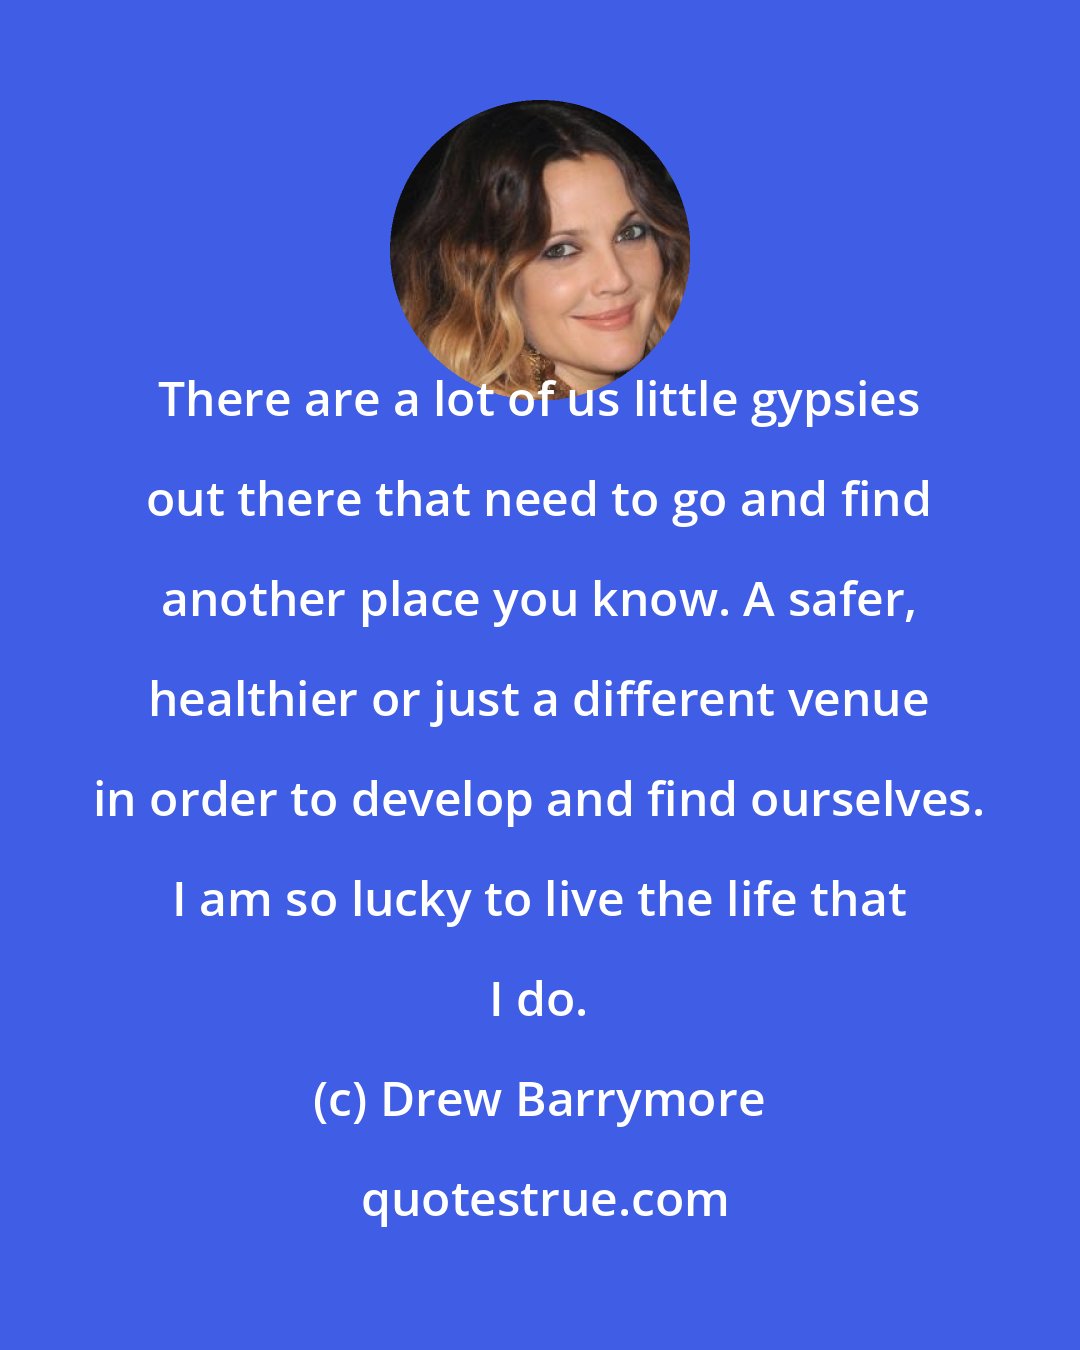 Drew Barrymore: There are a lot of us little gypsies out there that need to go and find another place you know. A safer, healthier or just a different venue in order to develop and find ourselves. I am so lucky to live the life that I do.